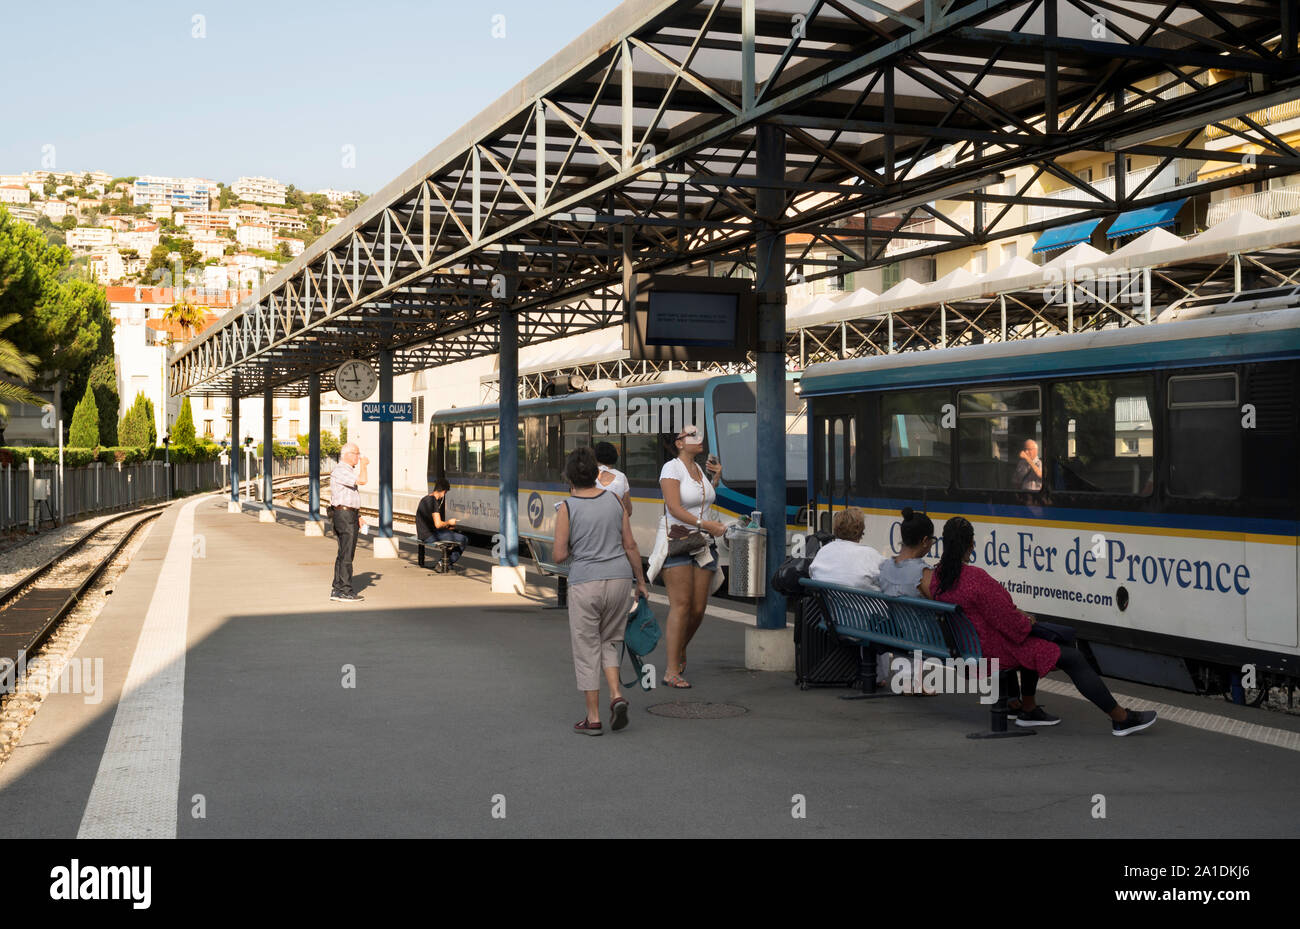 Passengers waiting for a train in the Chemins de Fer de Provence railway station, Nice, France, Europe Stock Photo